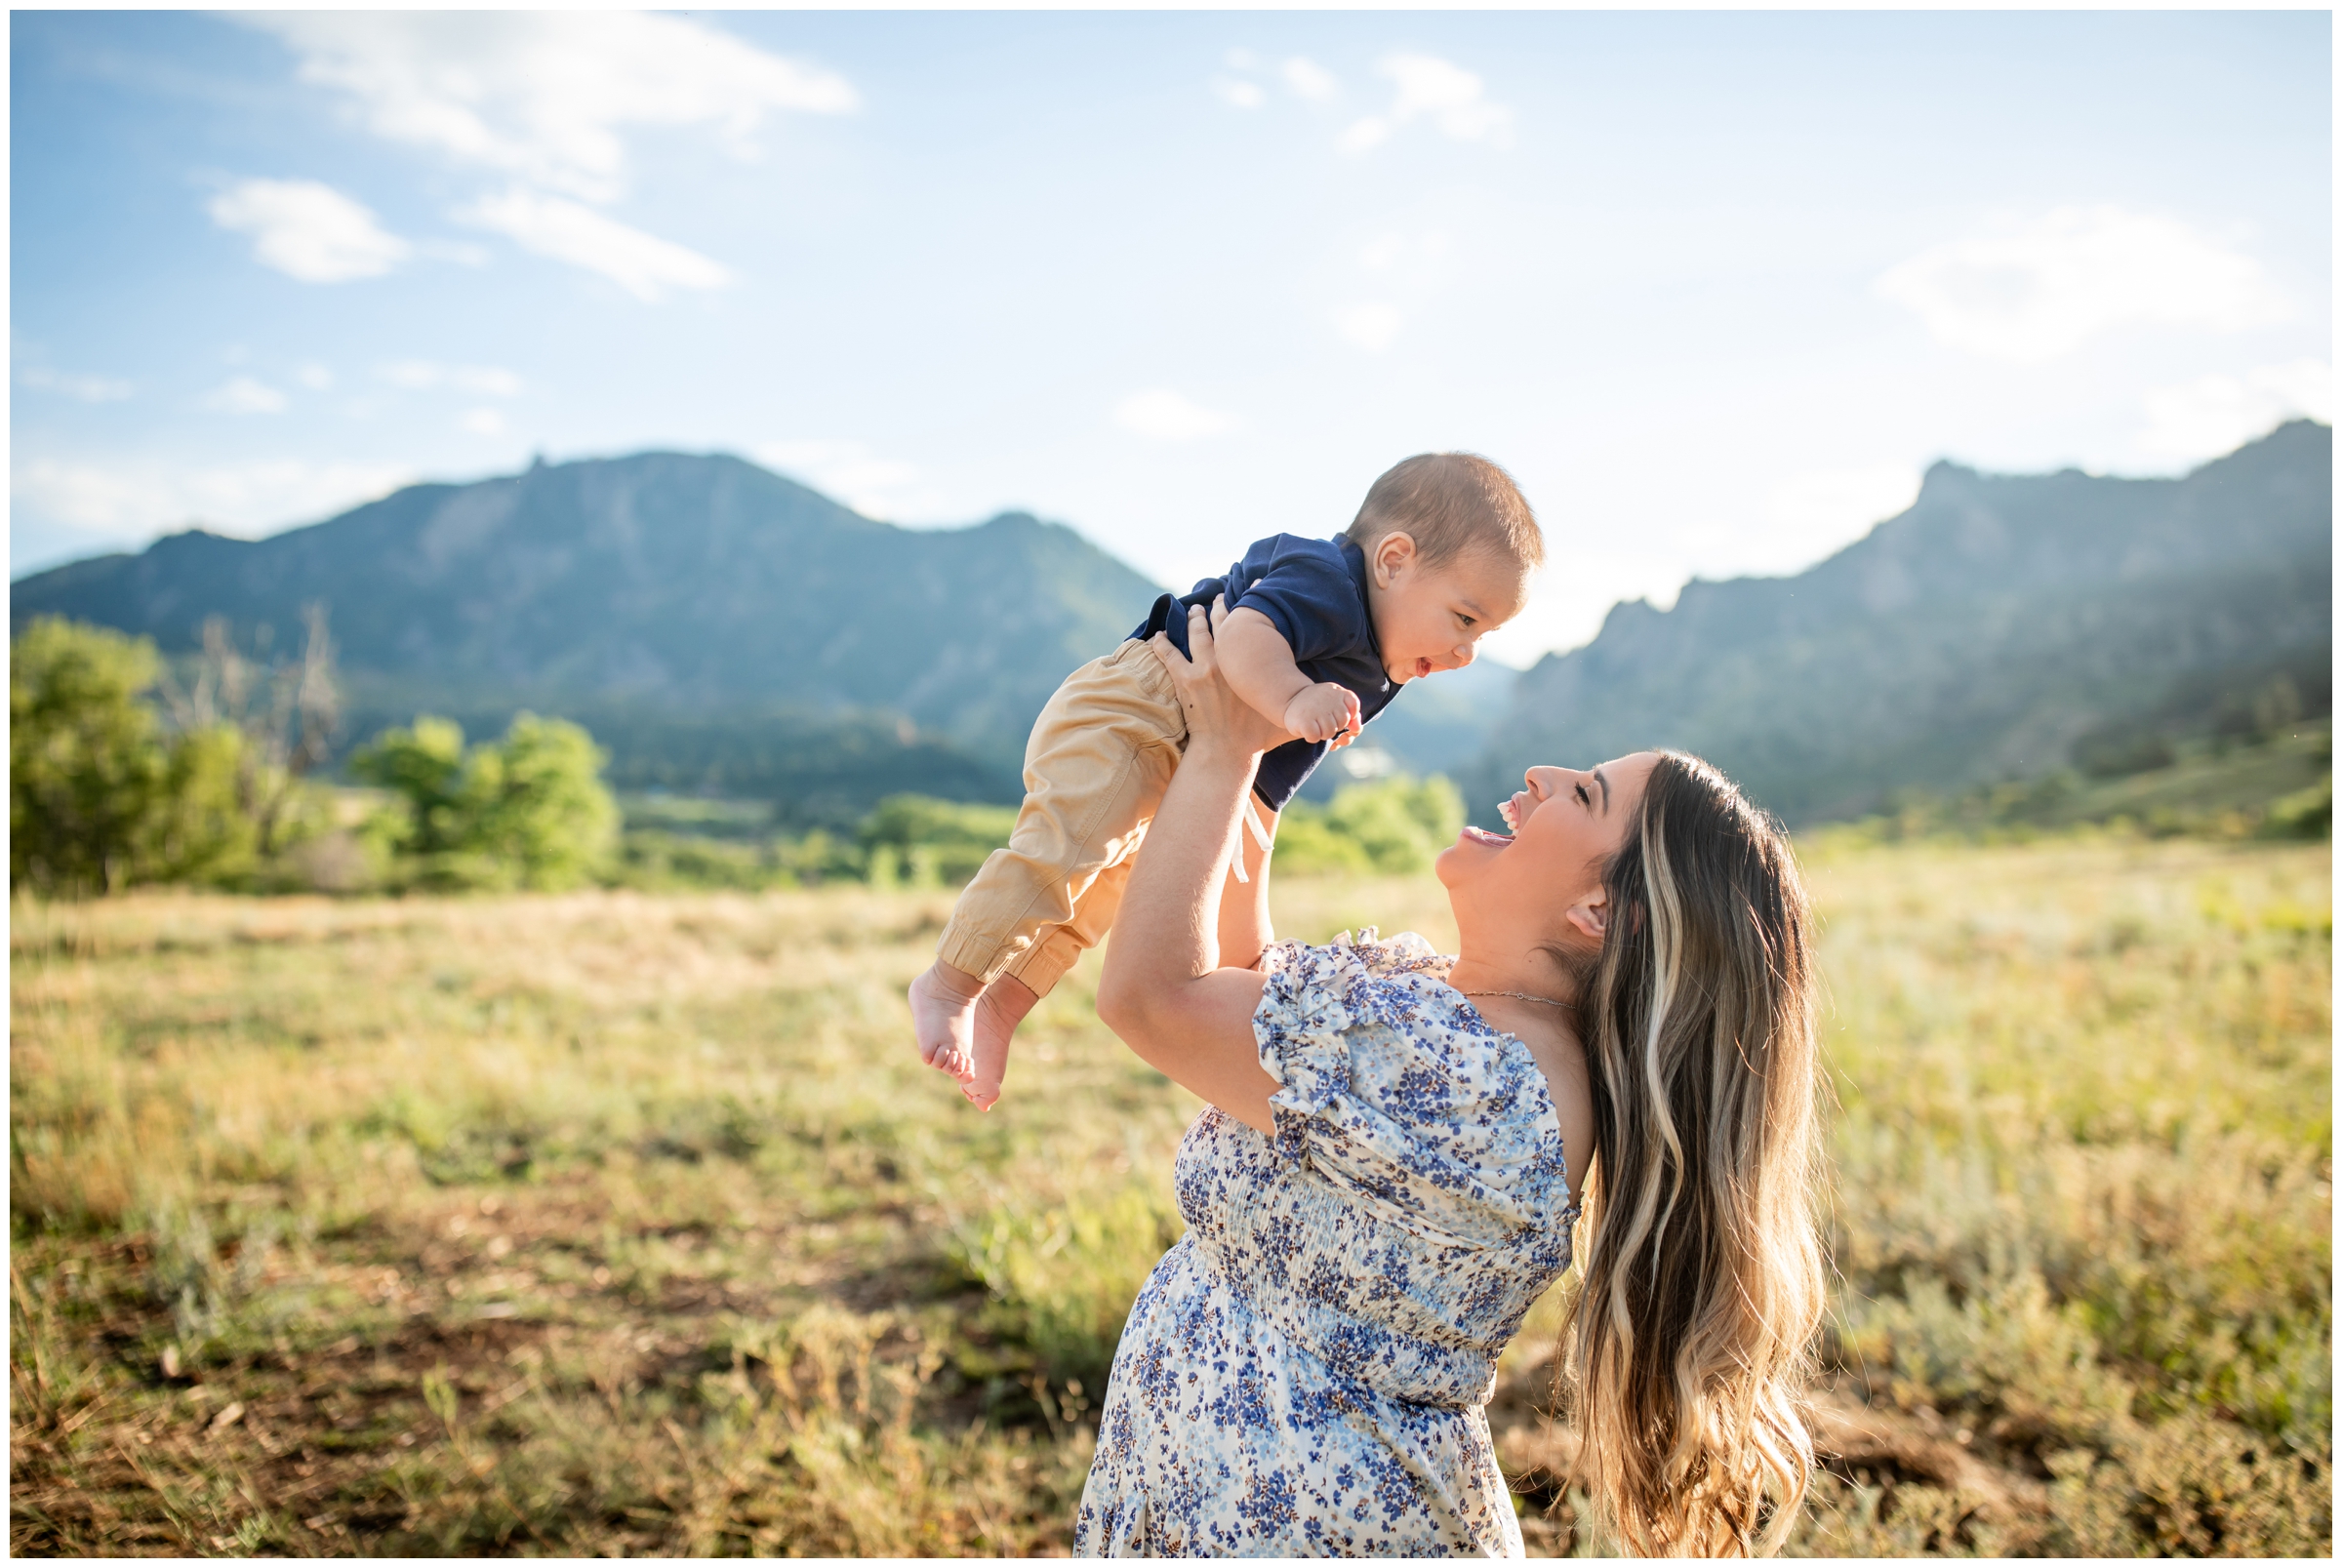 candid family photography inspiration by Plum Pretty Photography in Boulder Colorado 